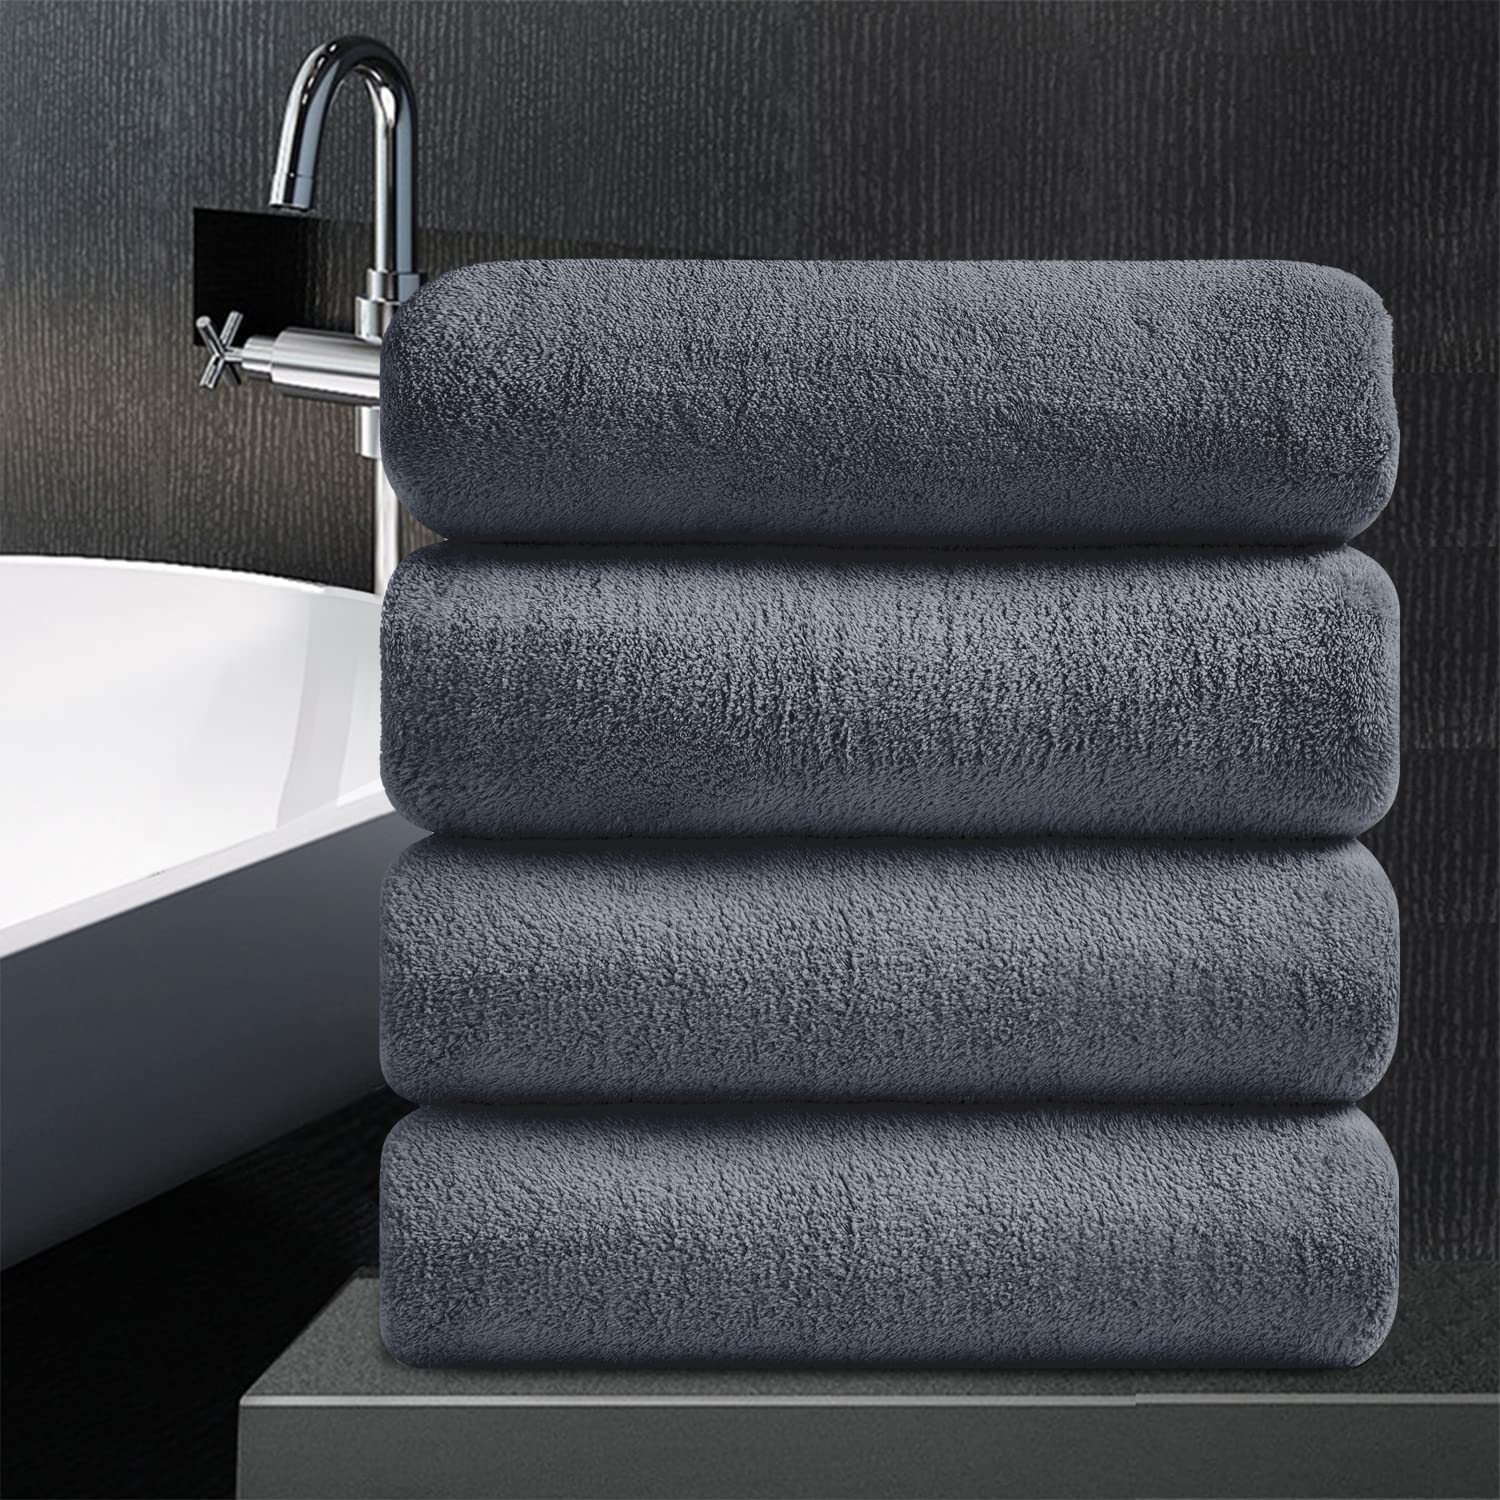 MAGGEA 4 Piece Oversized Bath Sheet Towels (35 x 70 in,Grey) 700 GSM Ultra  Soft Bath Towel Set Thick Large Cozy Plush Highly Absorbent Towels Quick